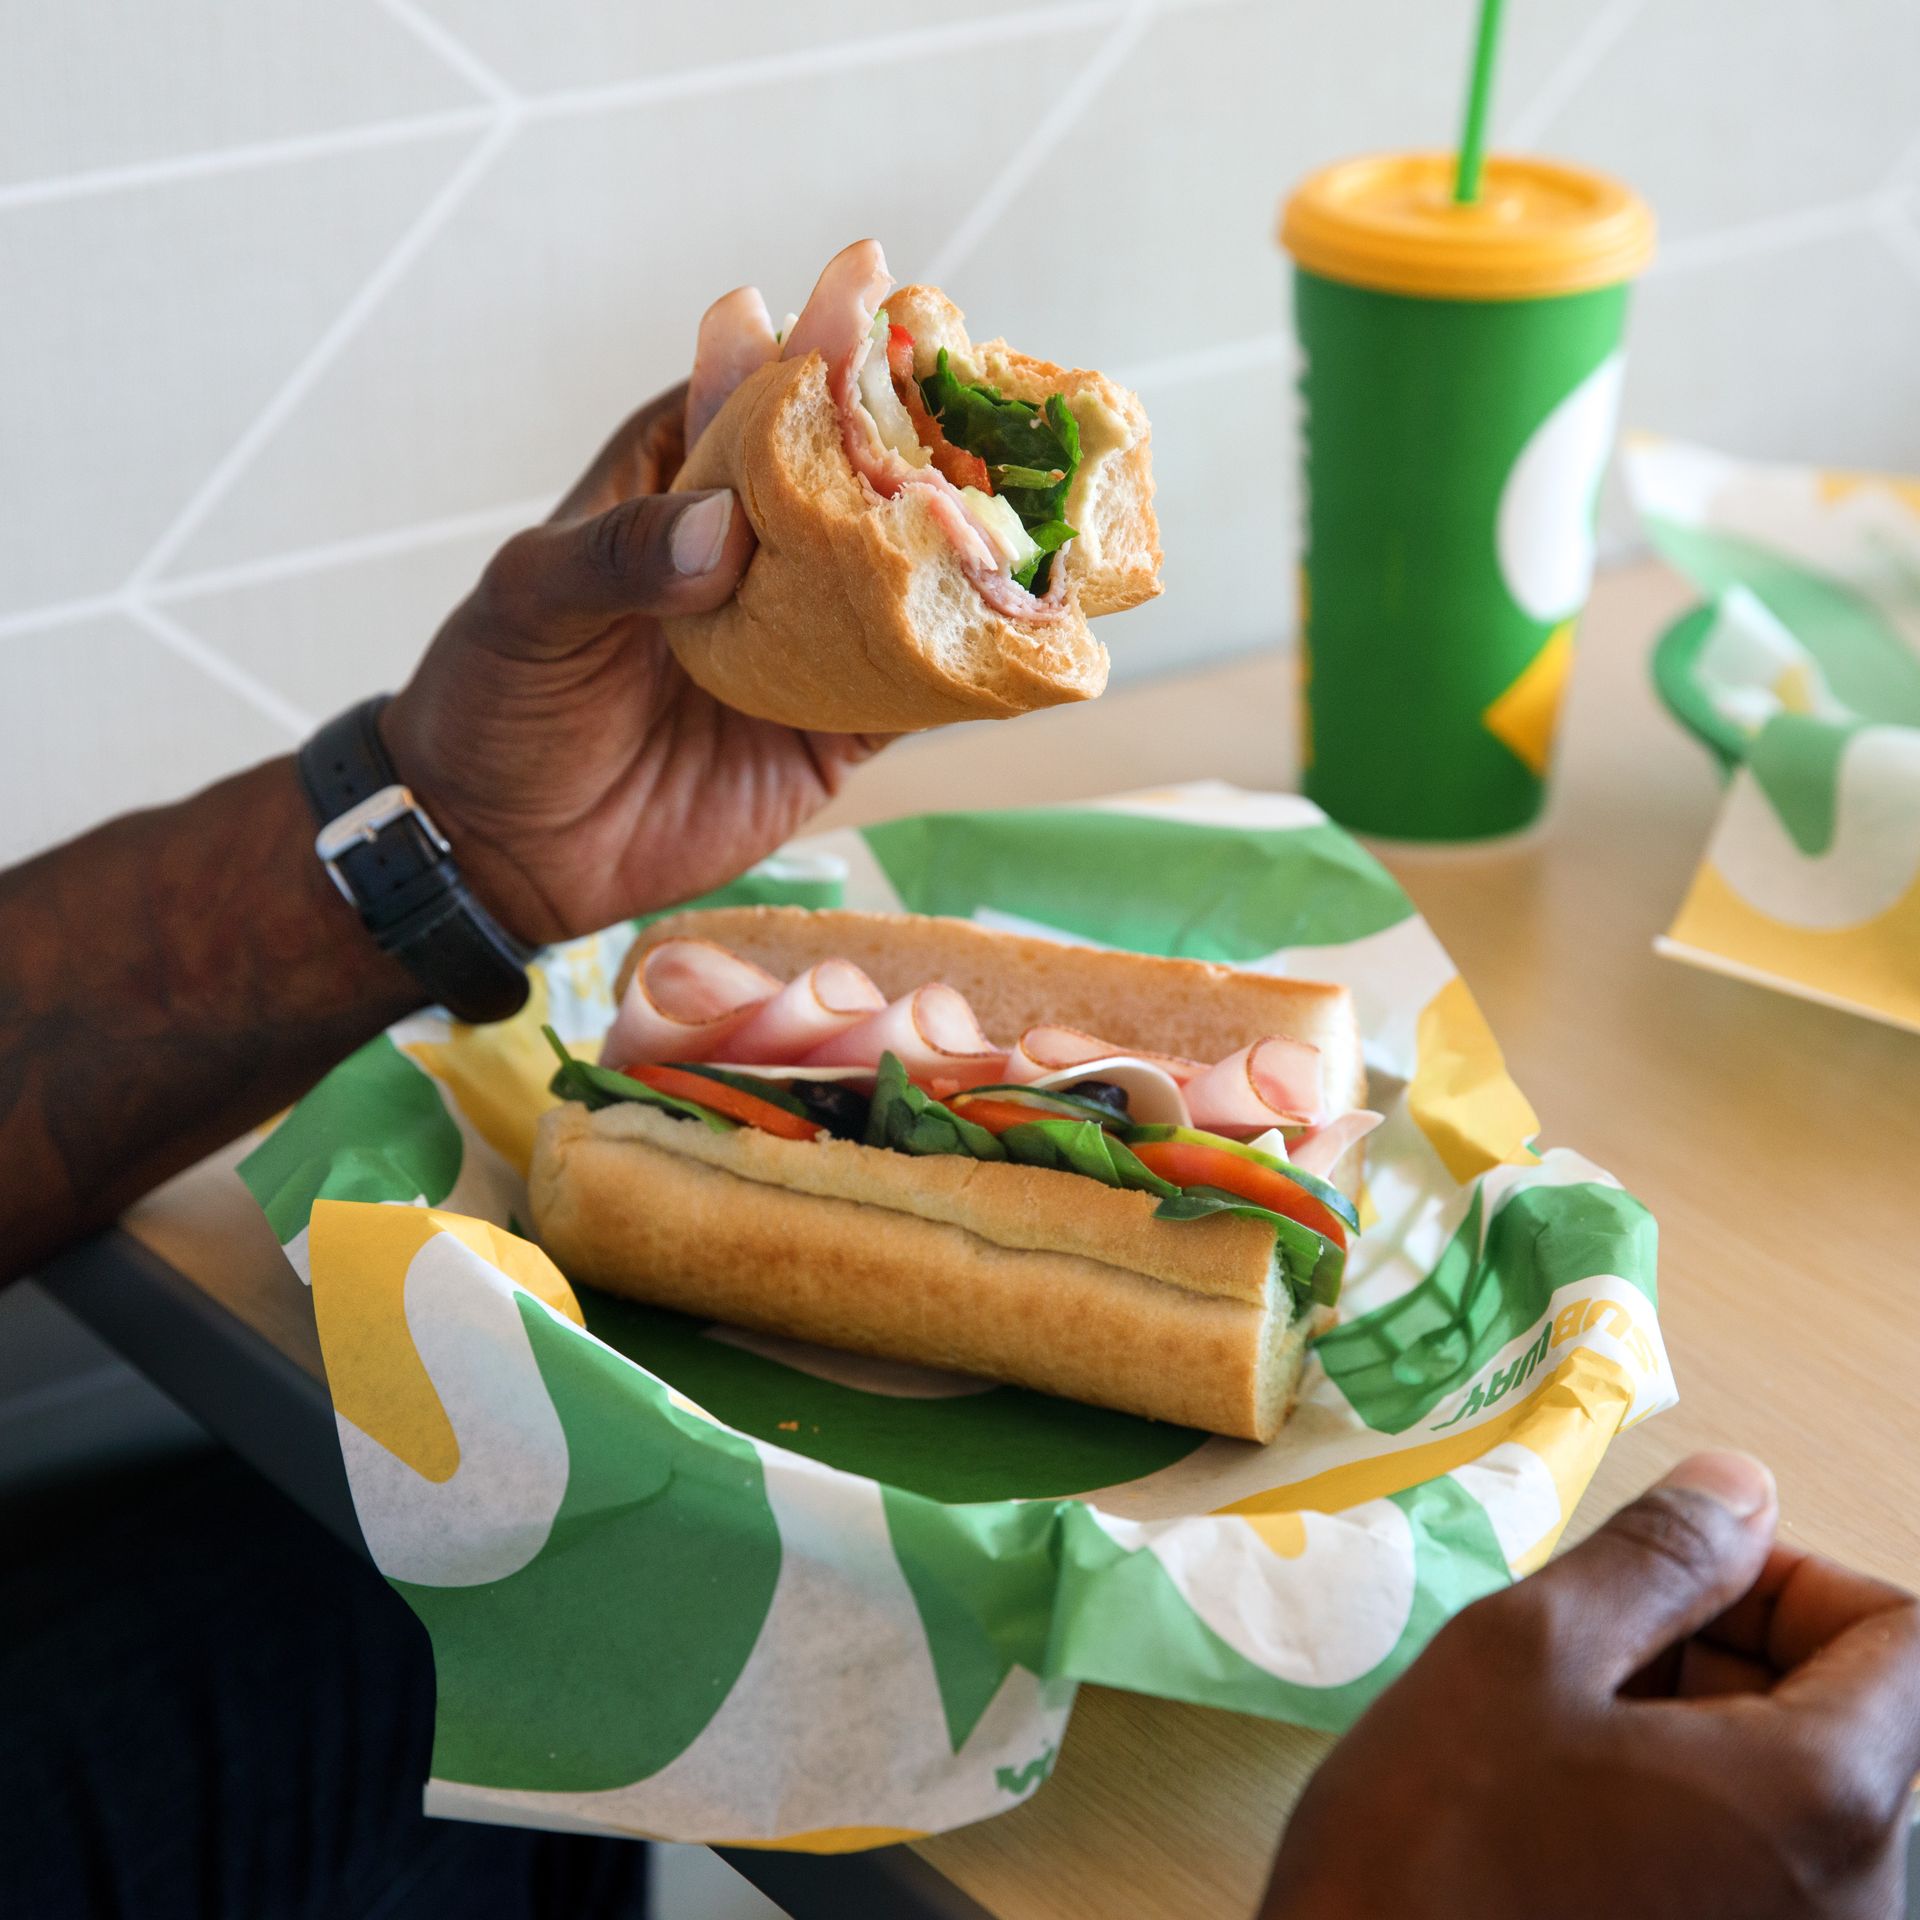 Does Subway Have Free Sandwiches on Veterans Day 2020 Near Me?